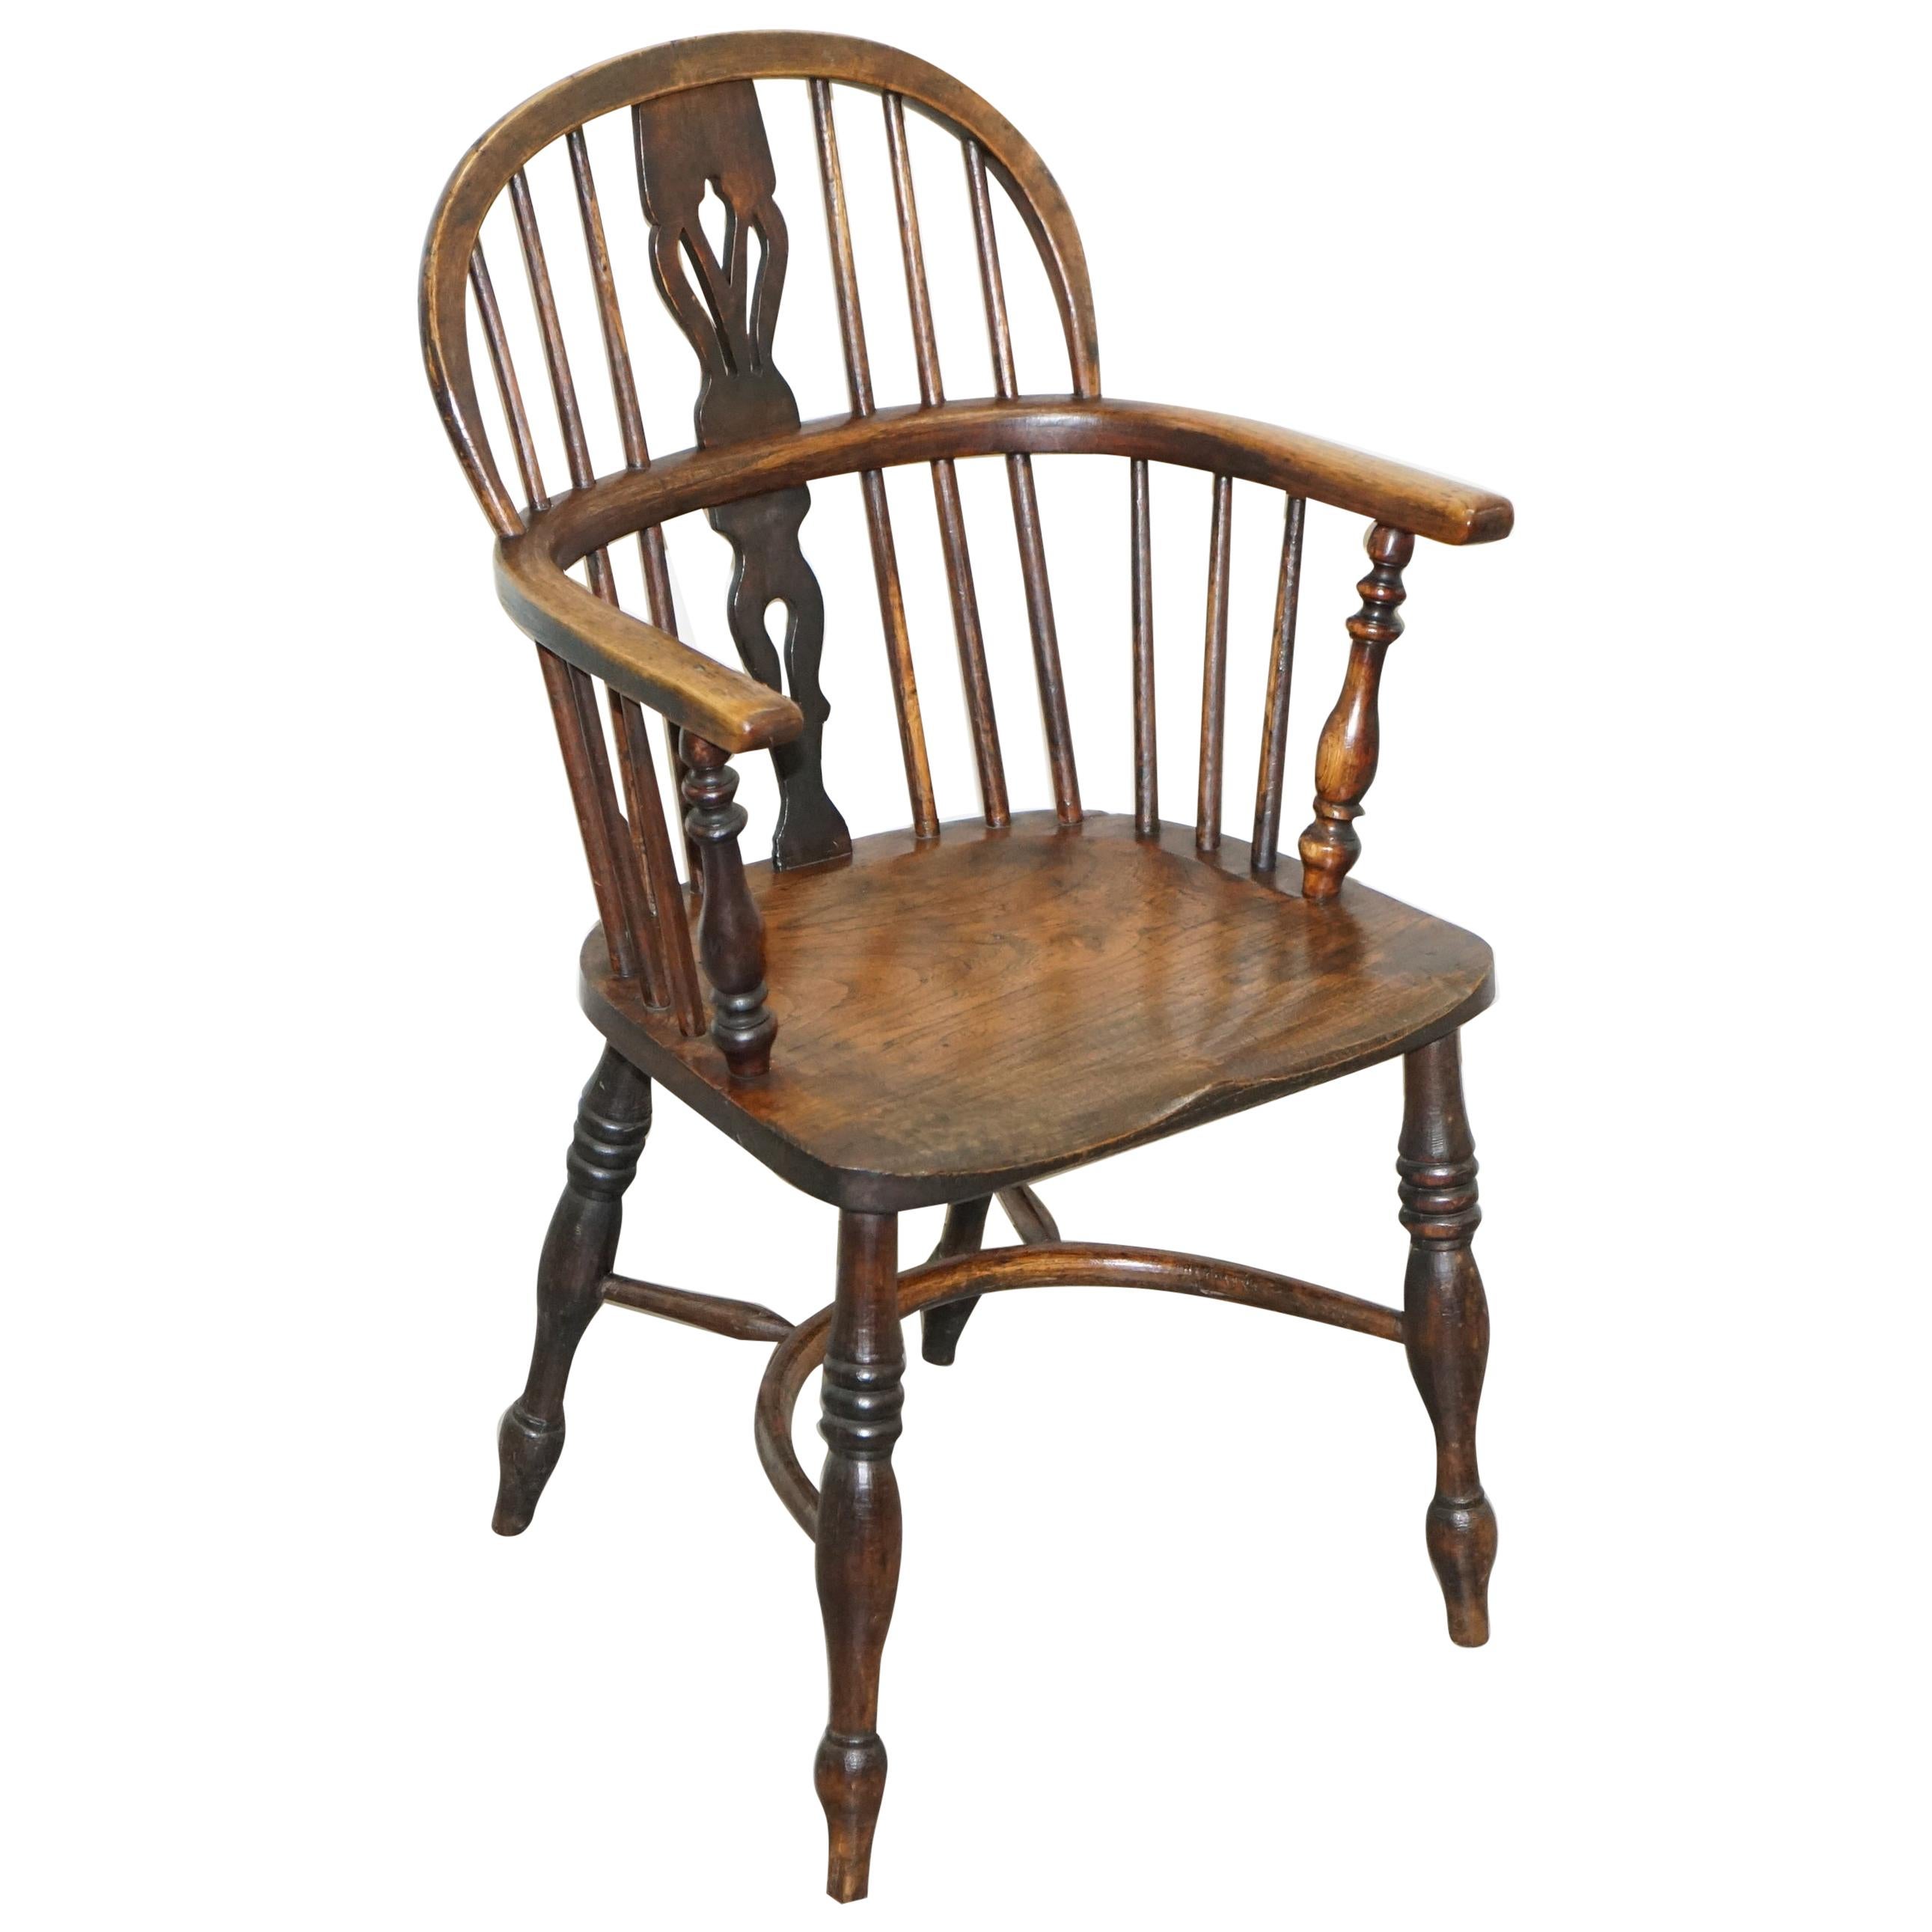 English Classic Antique Victorian 19th Century Elm and Ashwood Windsor Armchair